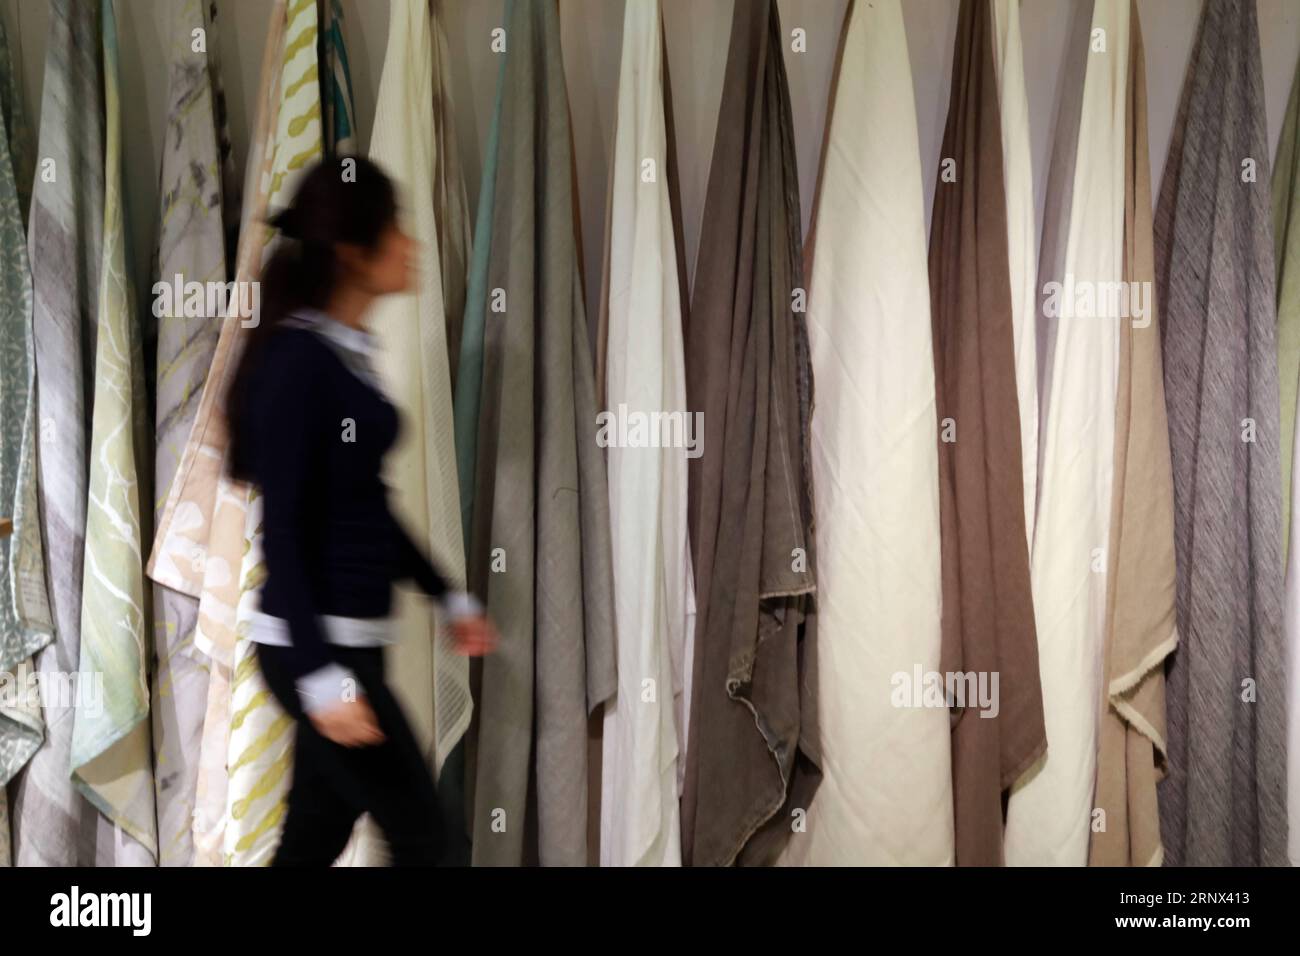 (180112) -- FRANKFURT, Jan. 12, 2018 -- A woman works at a Chinese textile booth at Heimtextil, the world s largest international trade fair for home and contract textiles, in Frankfurt, Germany, on Jan. 11, 2018. A total of 2,975 exhibitors from 64 countries and regions attended the trade fair this year, 545 of which are from China. ) (djj) GERMANY-FRANKFURT-HEIMTEXTIL-CHINA LuoxHuanhuan PUBLICATIONxNOTxINxCHN Stock Photo